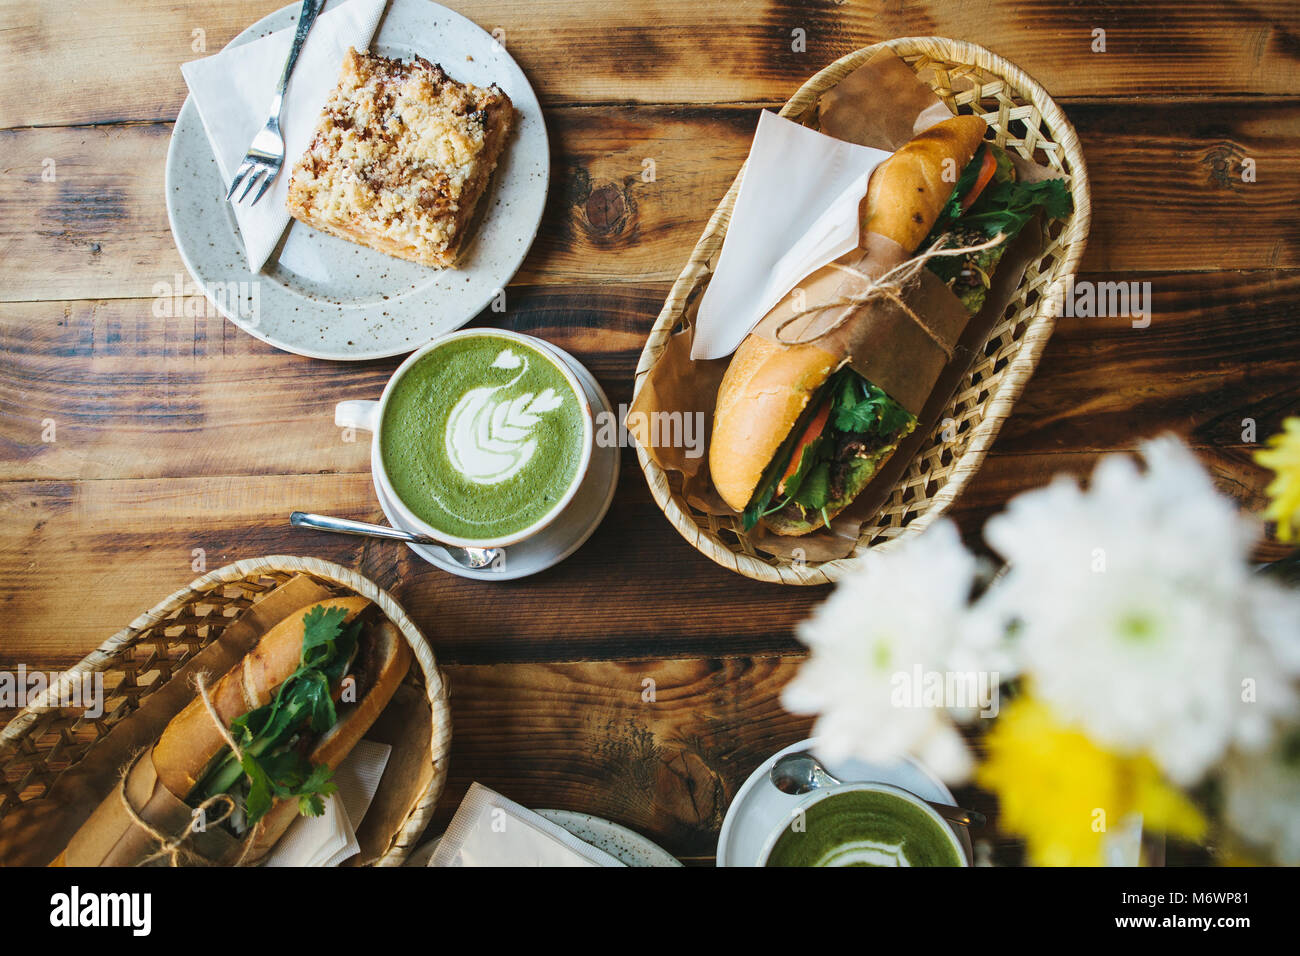 Healthy breakfast in the restaurant: cups of green tea with milk called Matcha, dessert and sandwiches with vegetables and herbs on wooden table. Nearby are yellow flowers to decorate the table. Stock Photo